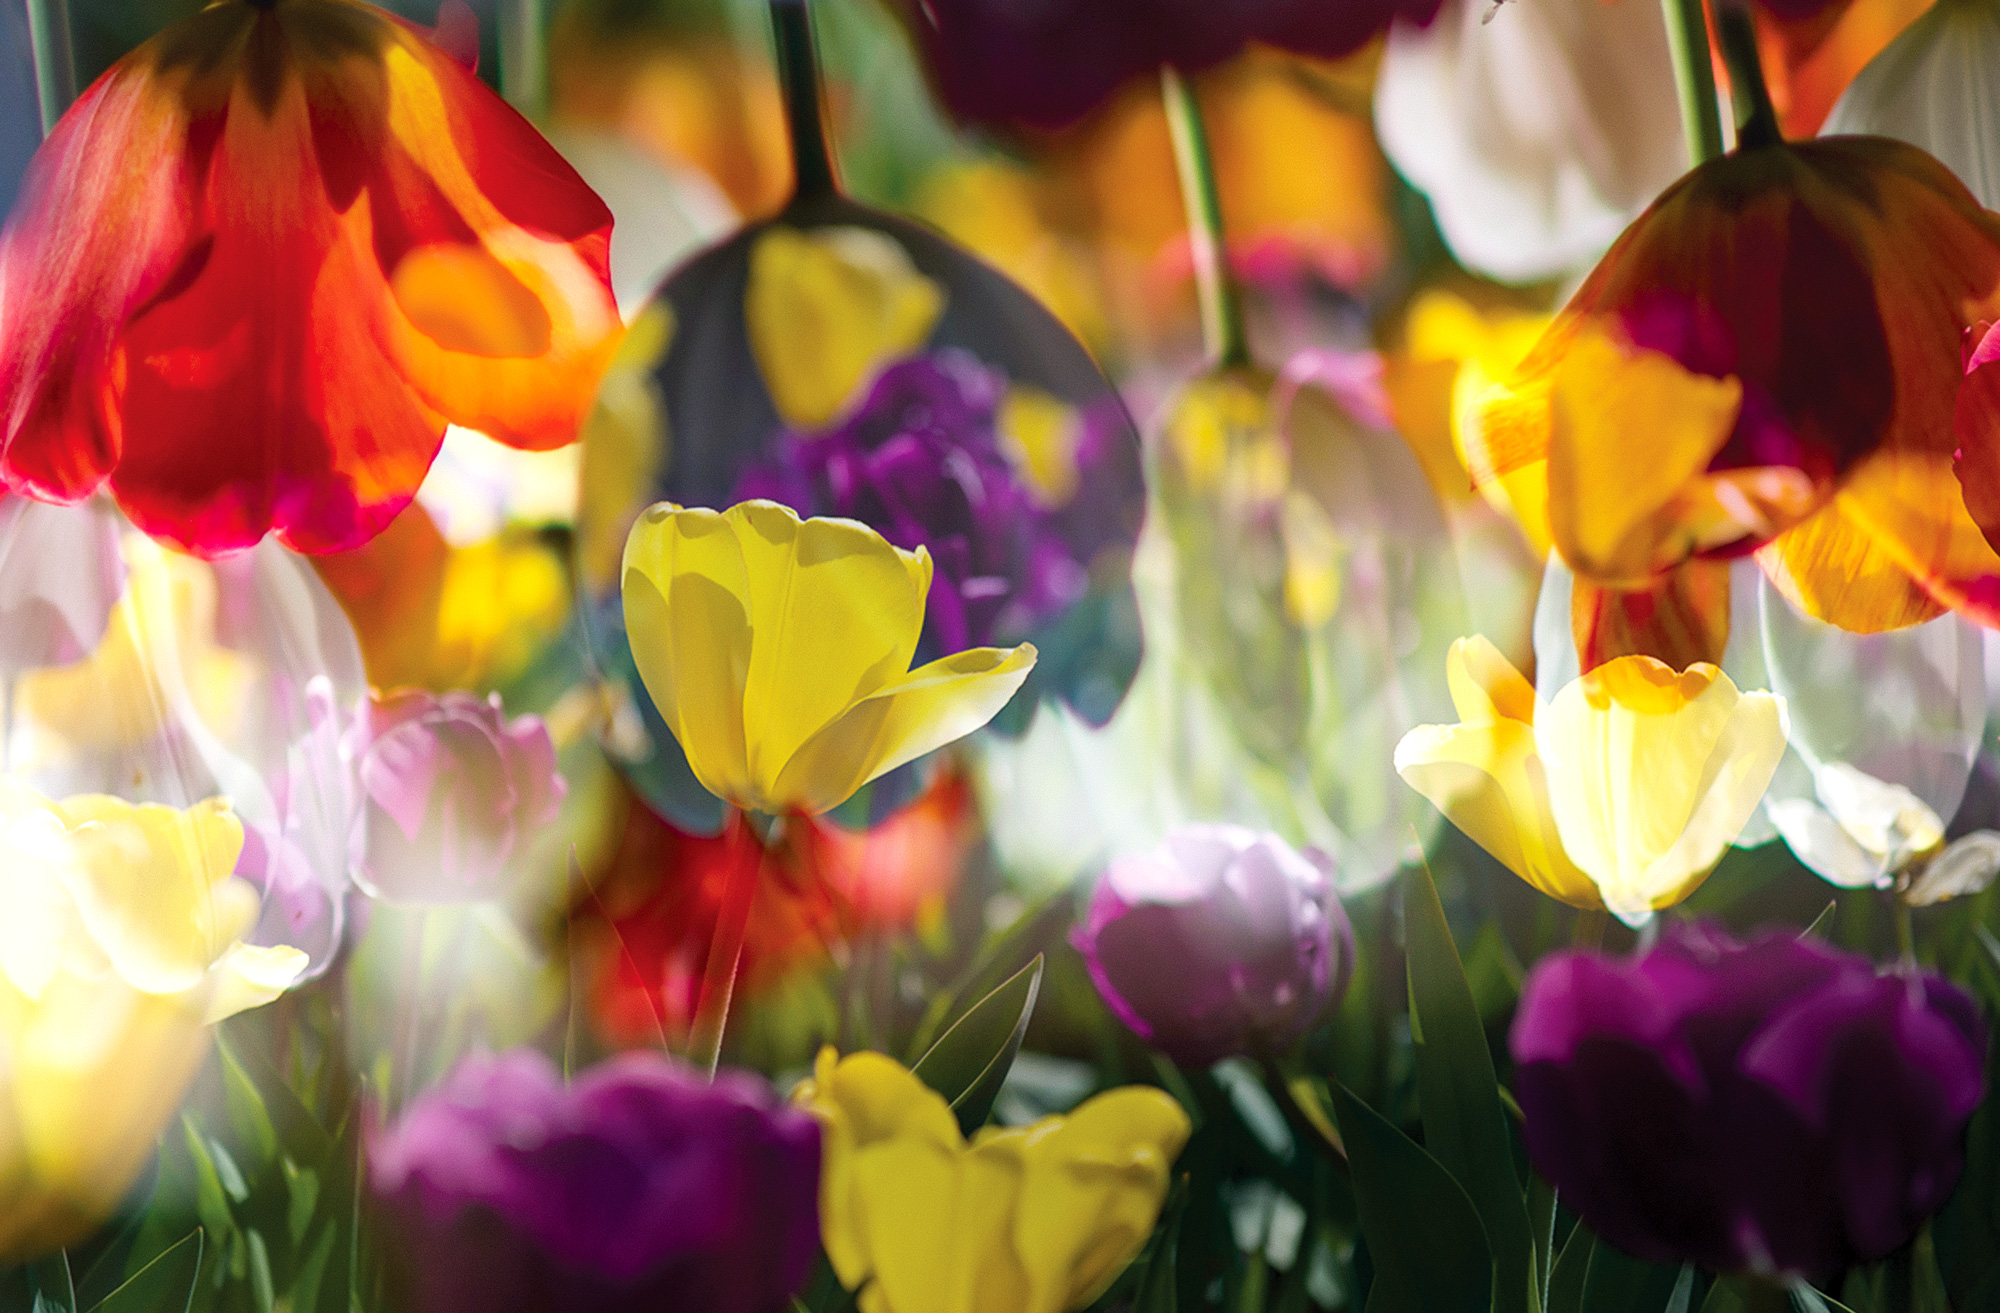 Double exposure of two images of tulips on top of each other